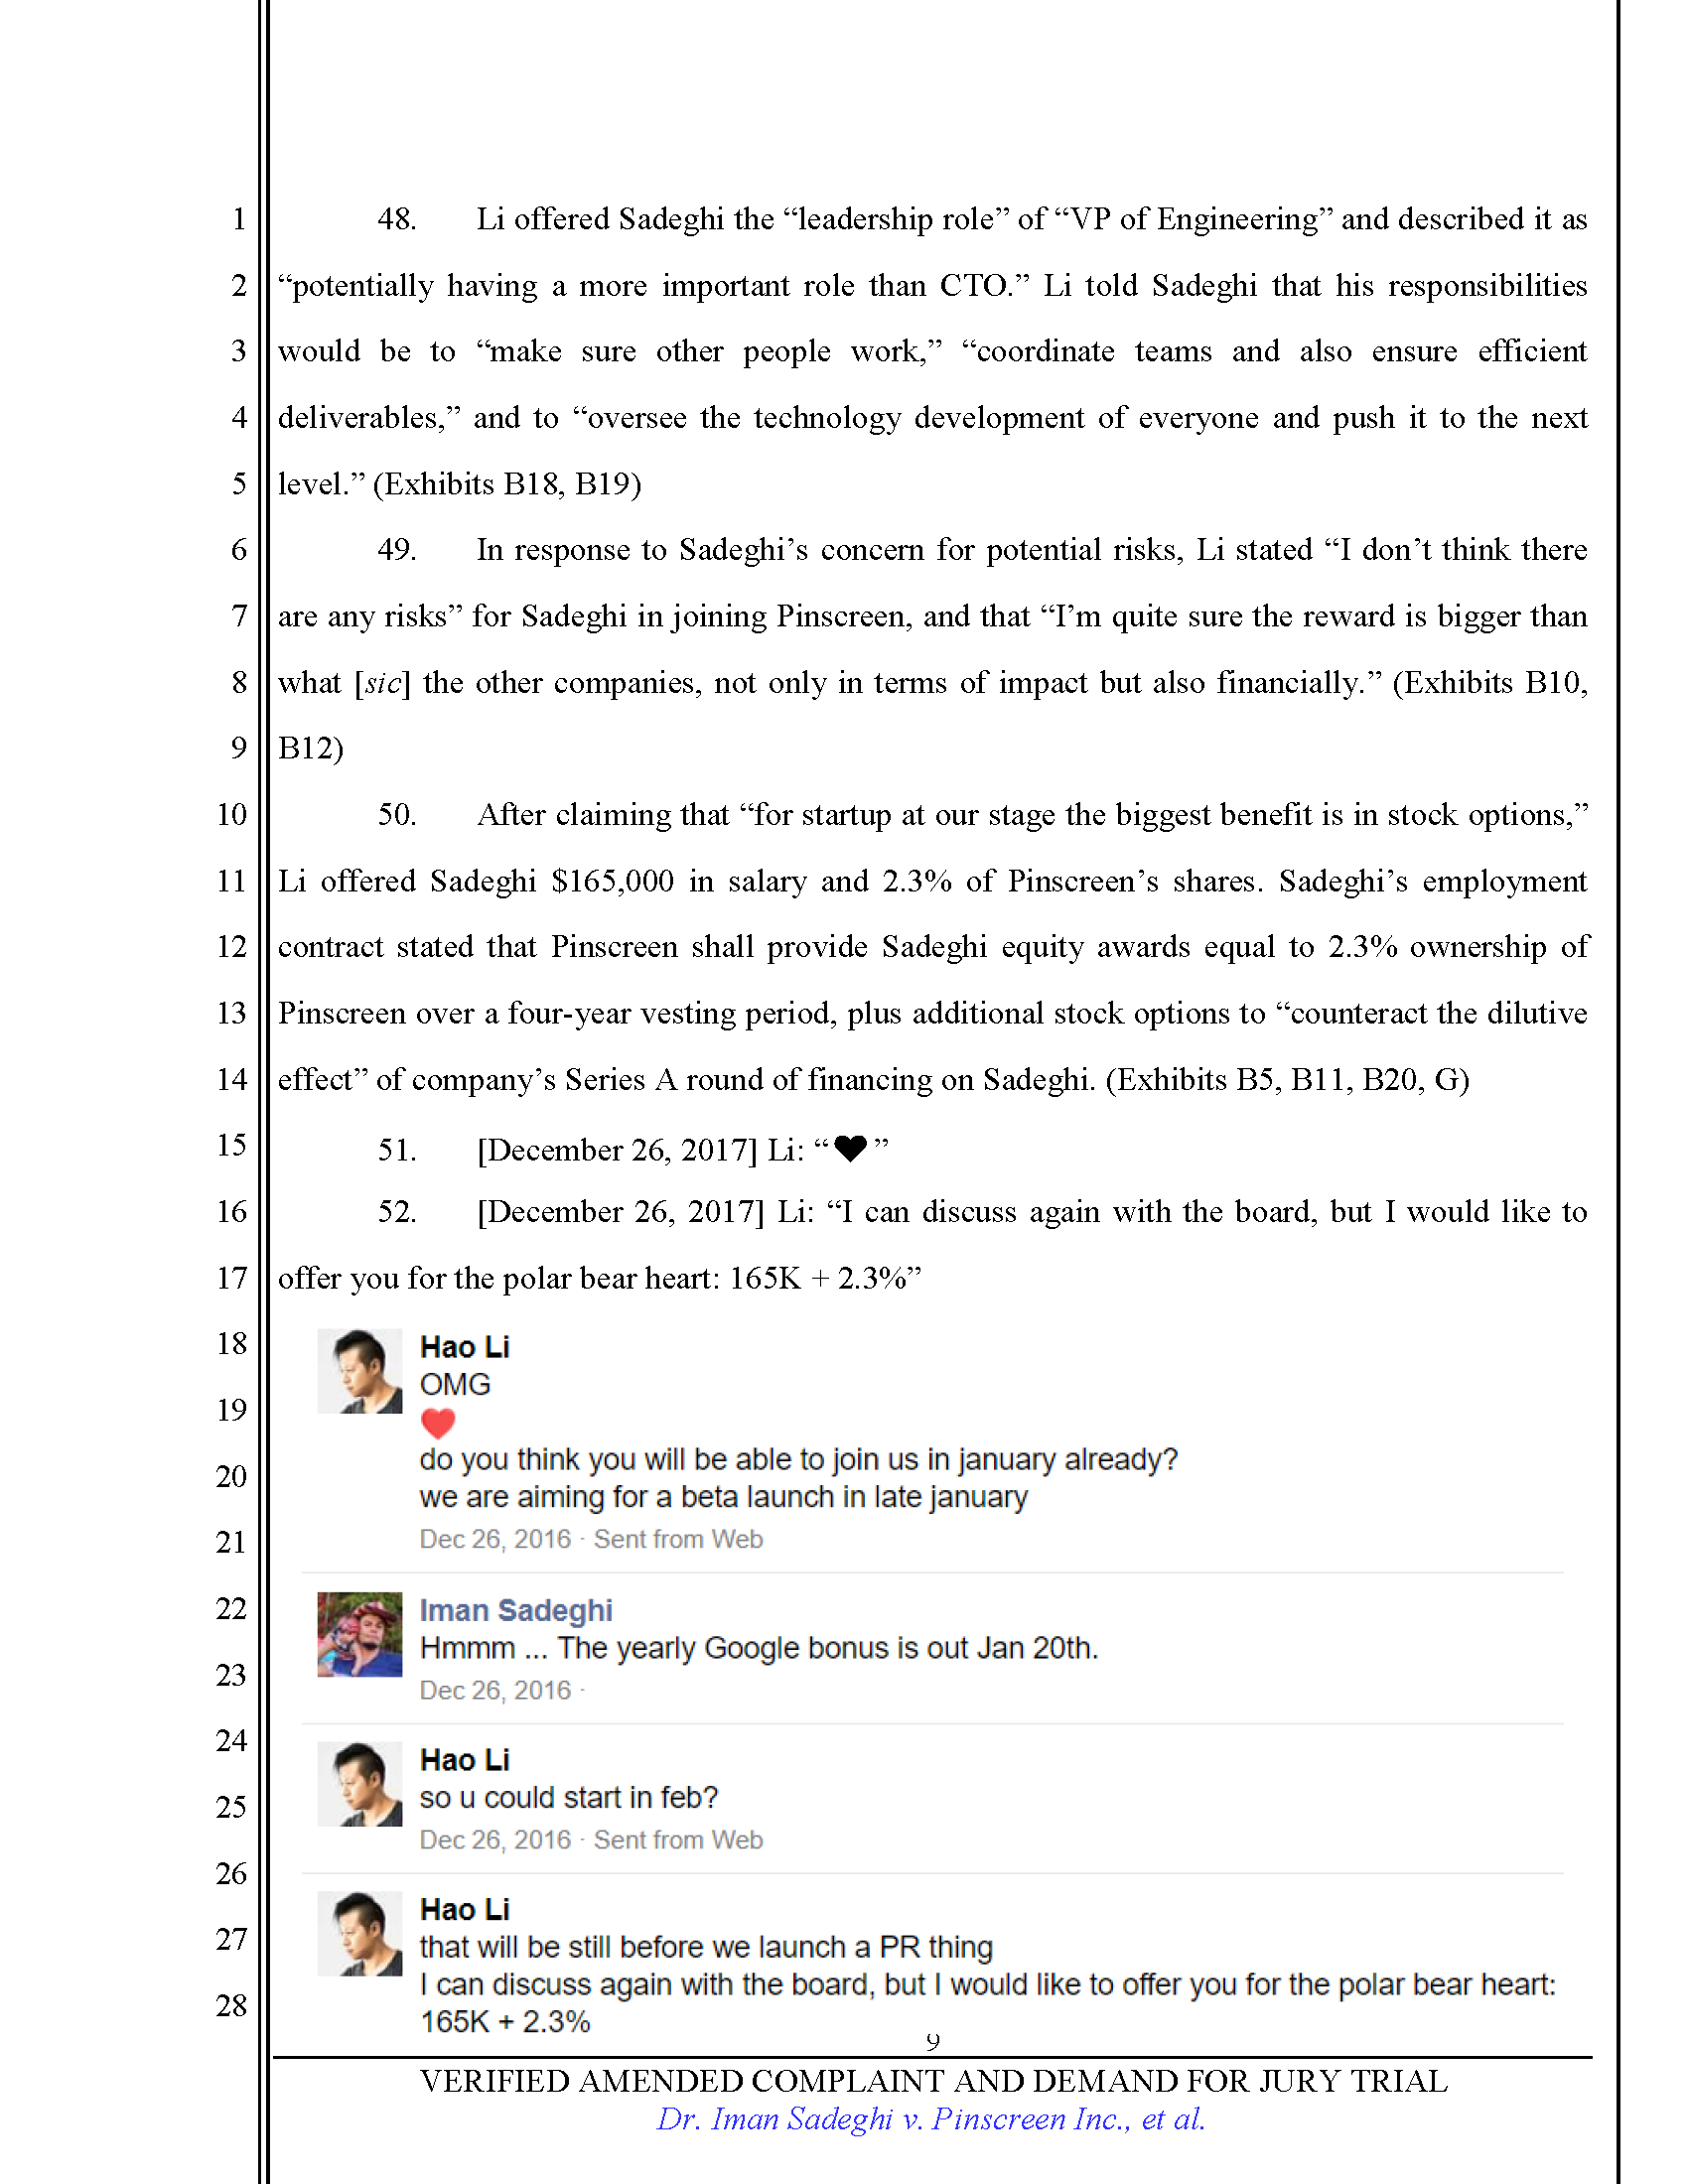 First Amended Complaint (FAC) Page 9